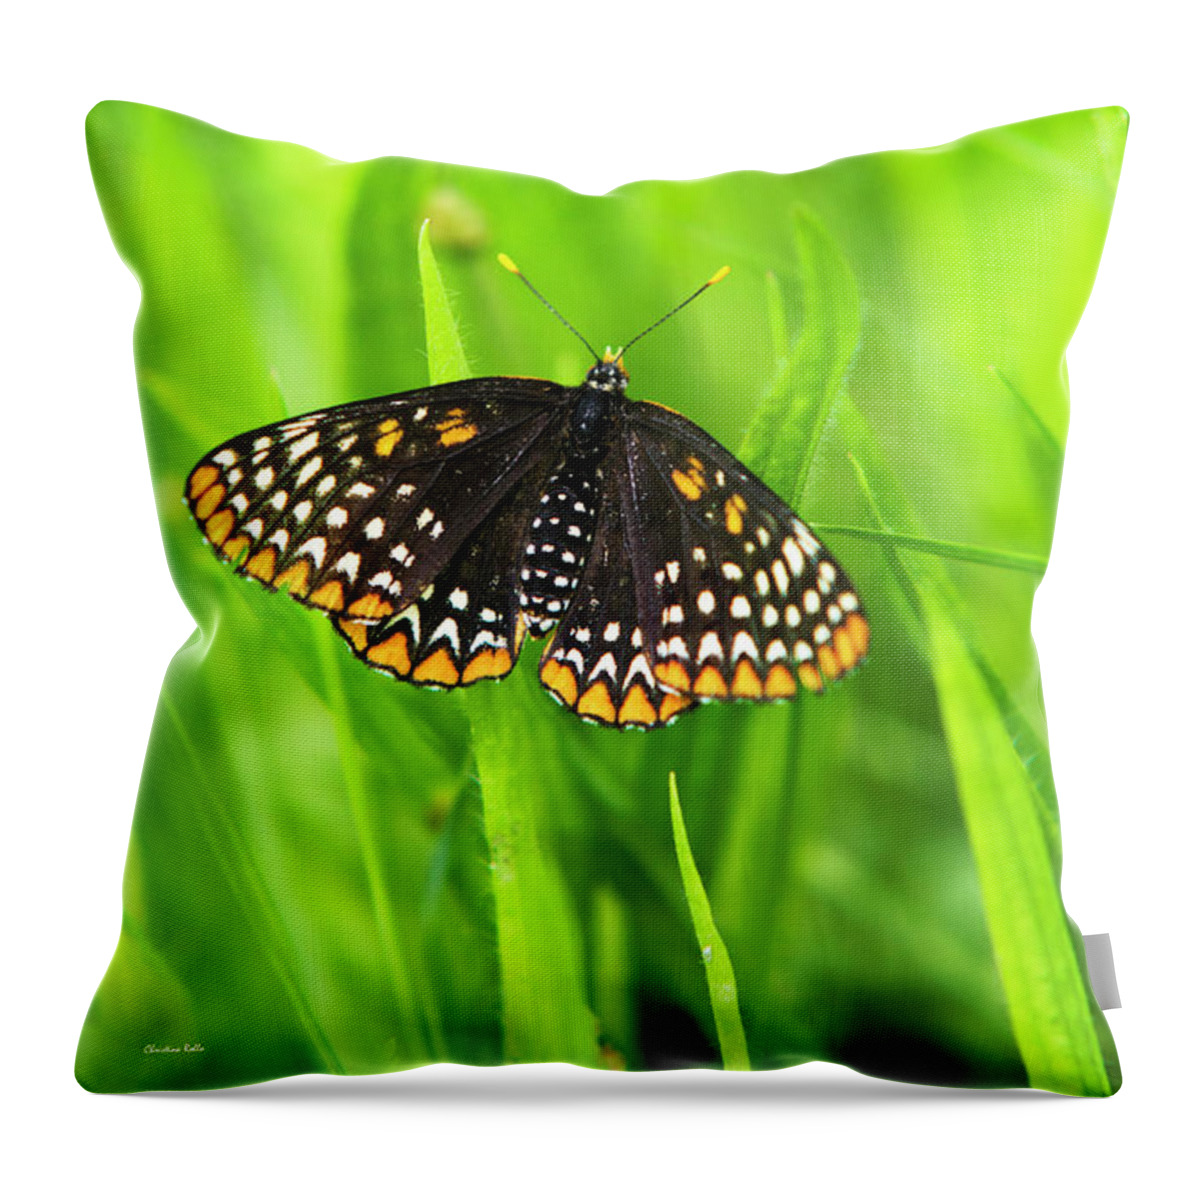 Baltimore Checkerspot Butterfly Throw Pillow featuring the photograph Baltimore Checkerspot Butterfly by Christina Rollo